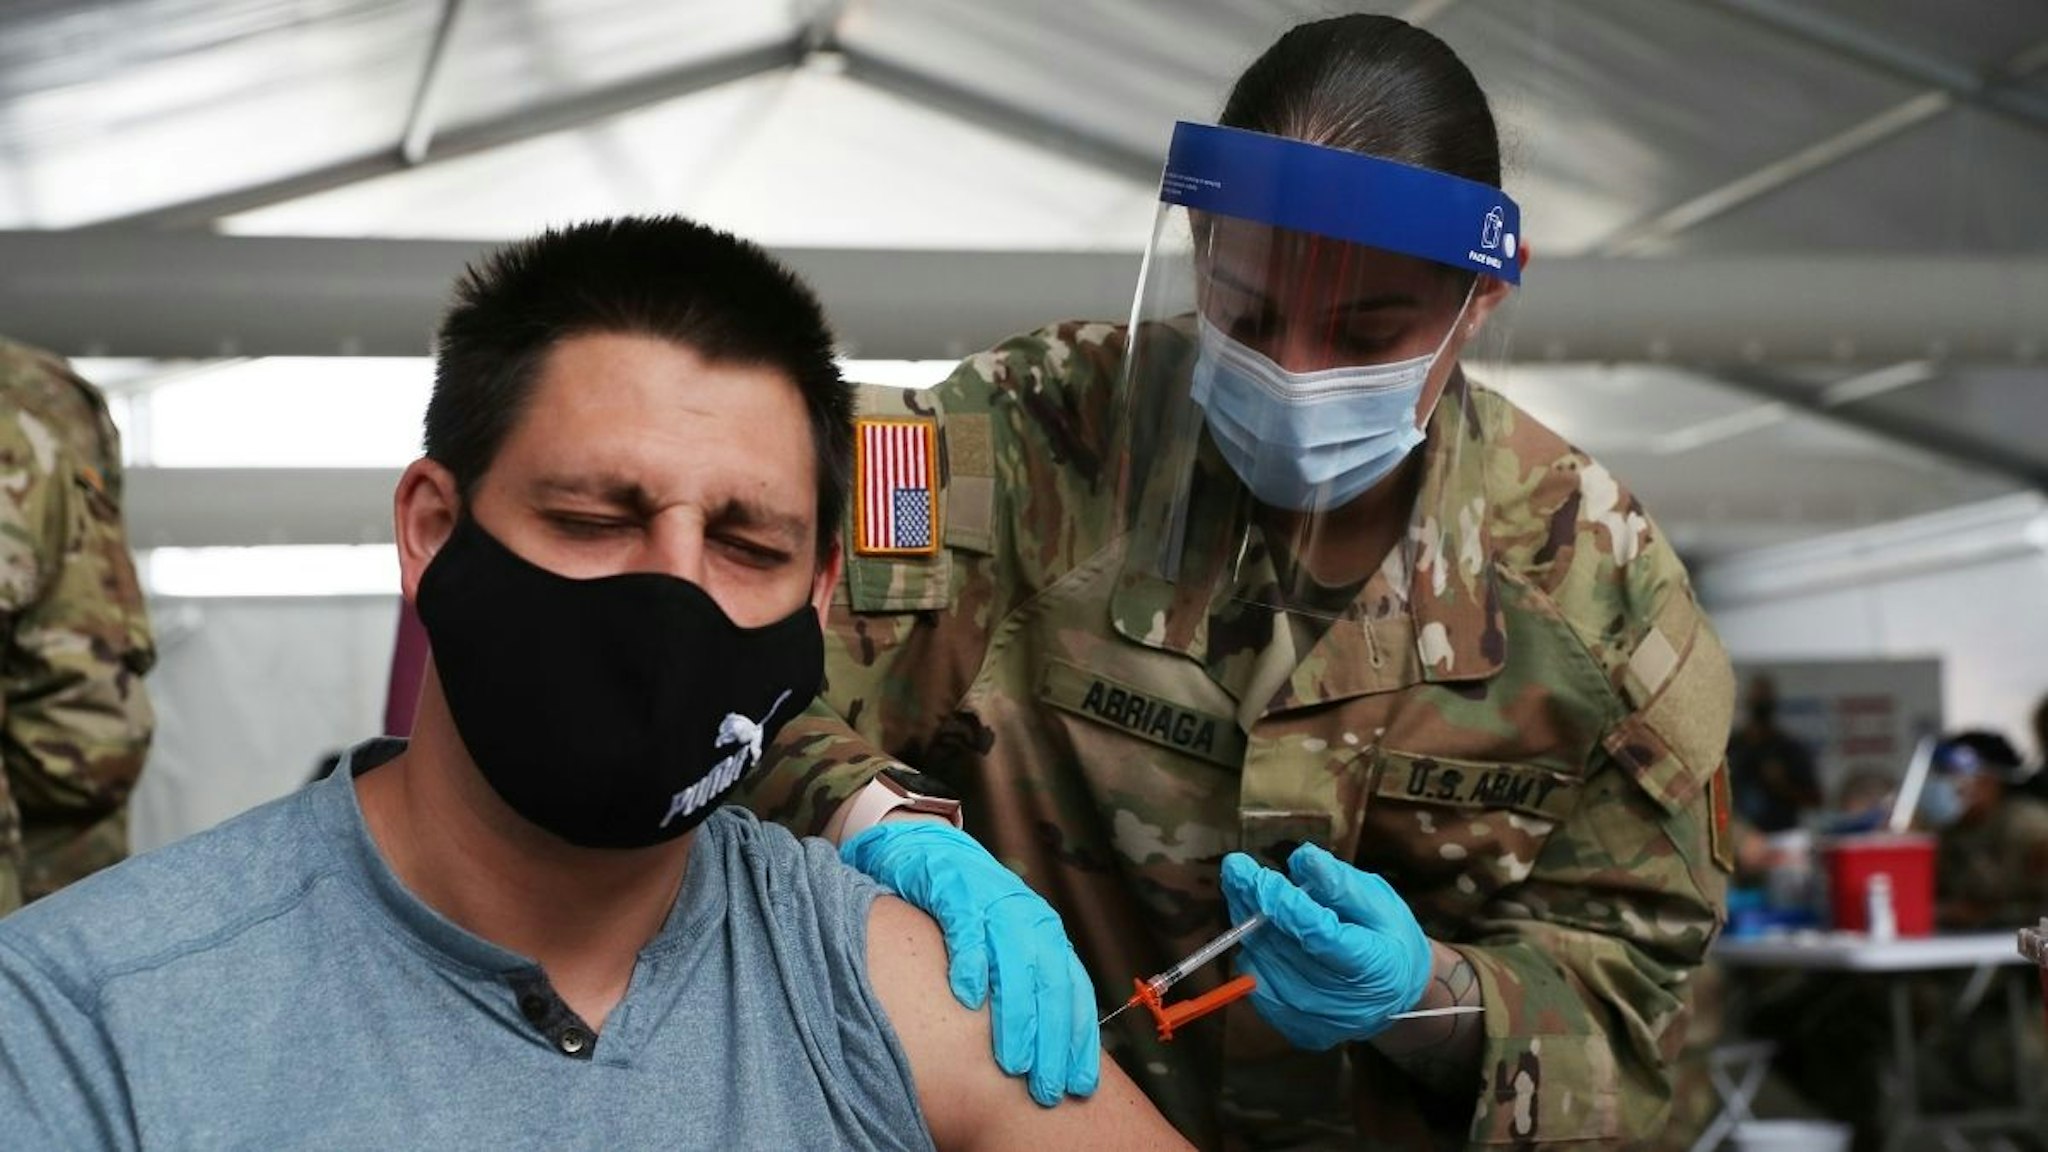 A U.S. Army soldier from the 2nd Armored Brigade Combat Team, 1st Infantry Division, immunizes Max Pietro with the Johnson and Johnson COVID-19 vaccine at the Miami Dade College North Campus on March 10, 2021 in North Miami, Florida.